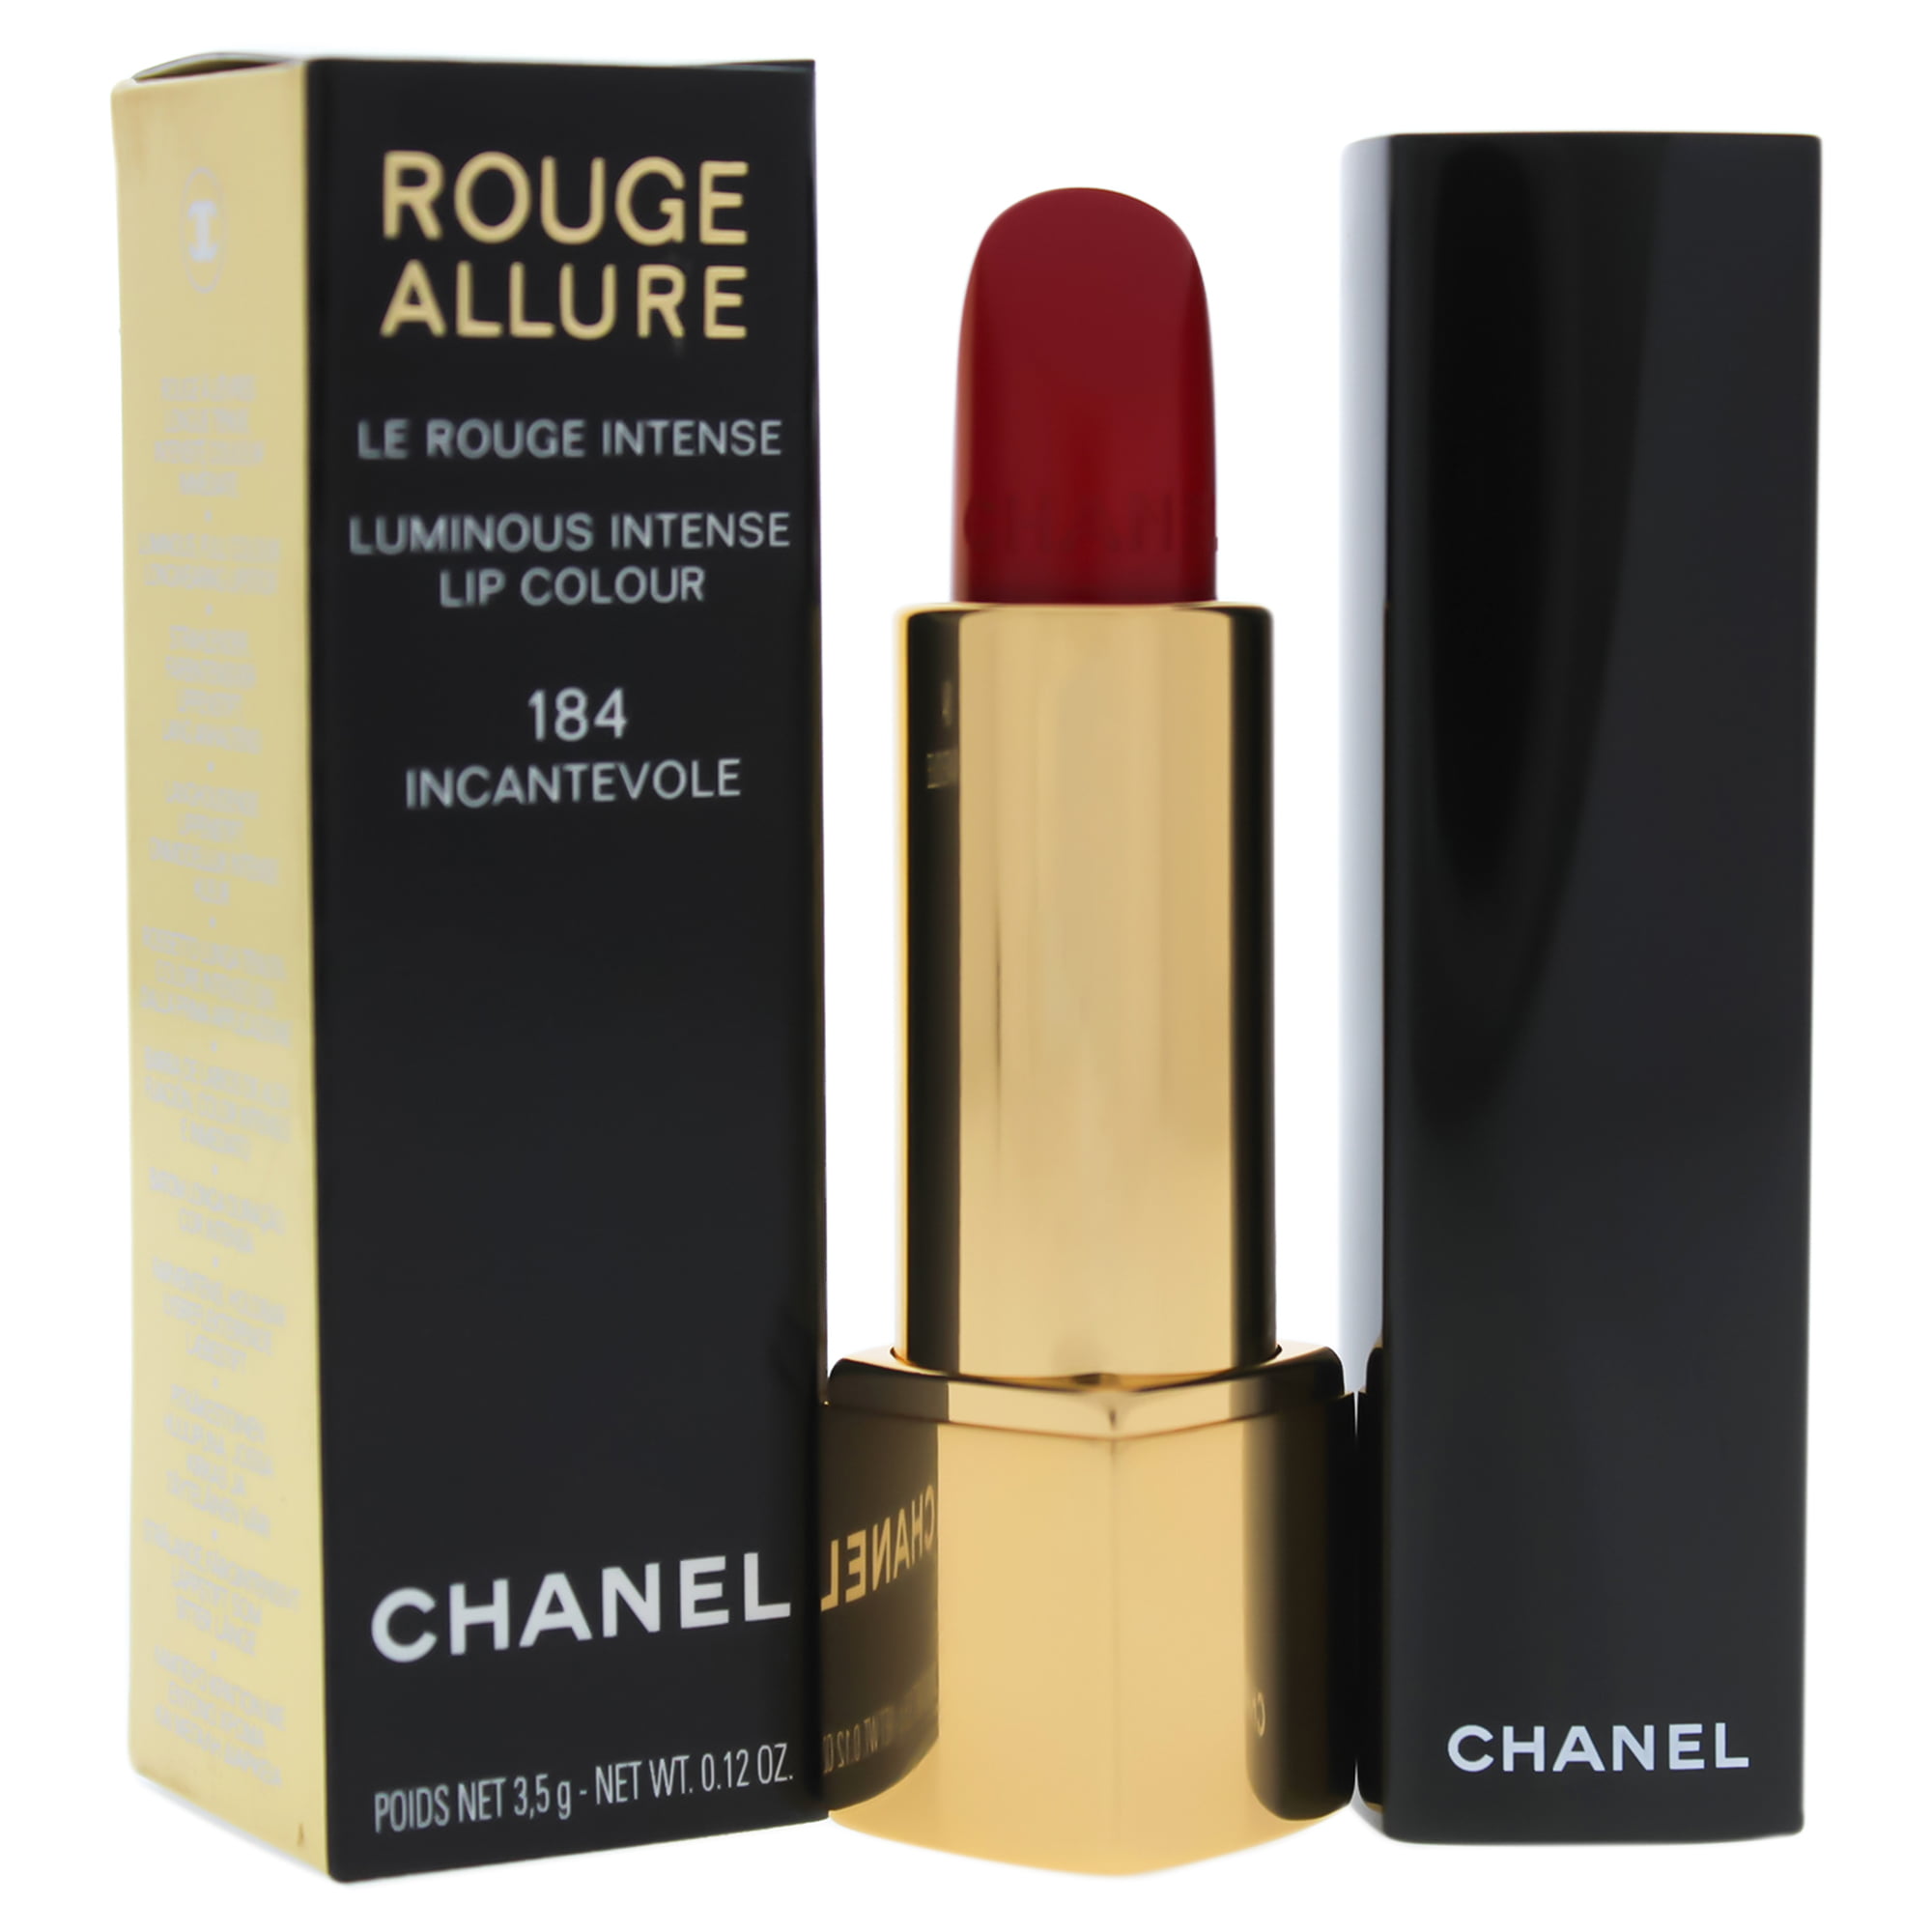 Rouge Allure Ink - 184 Incantevole by Chanel for Women - 0.12 oz Lipstick 